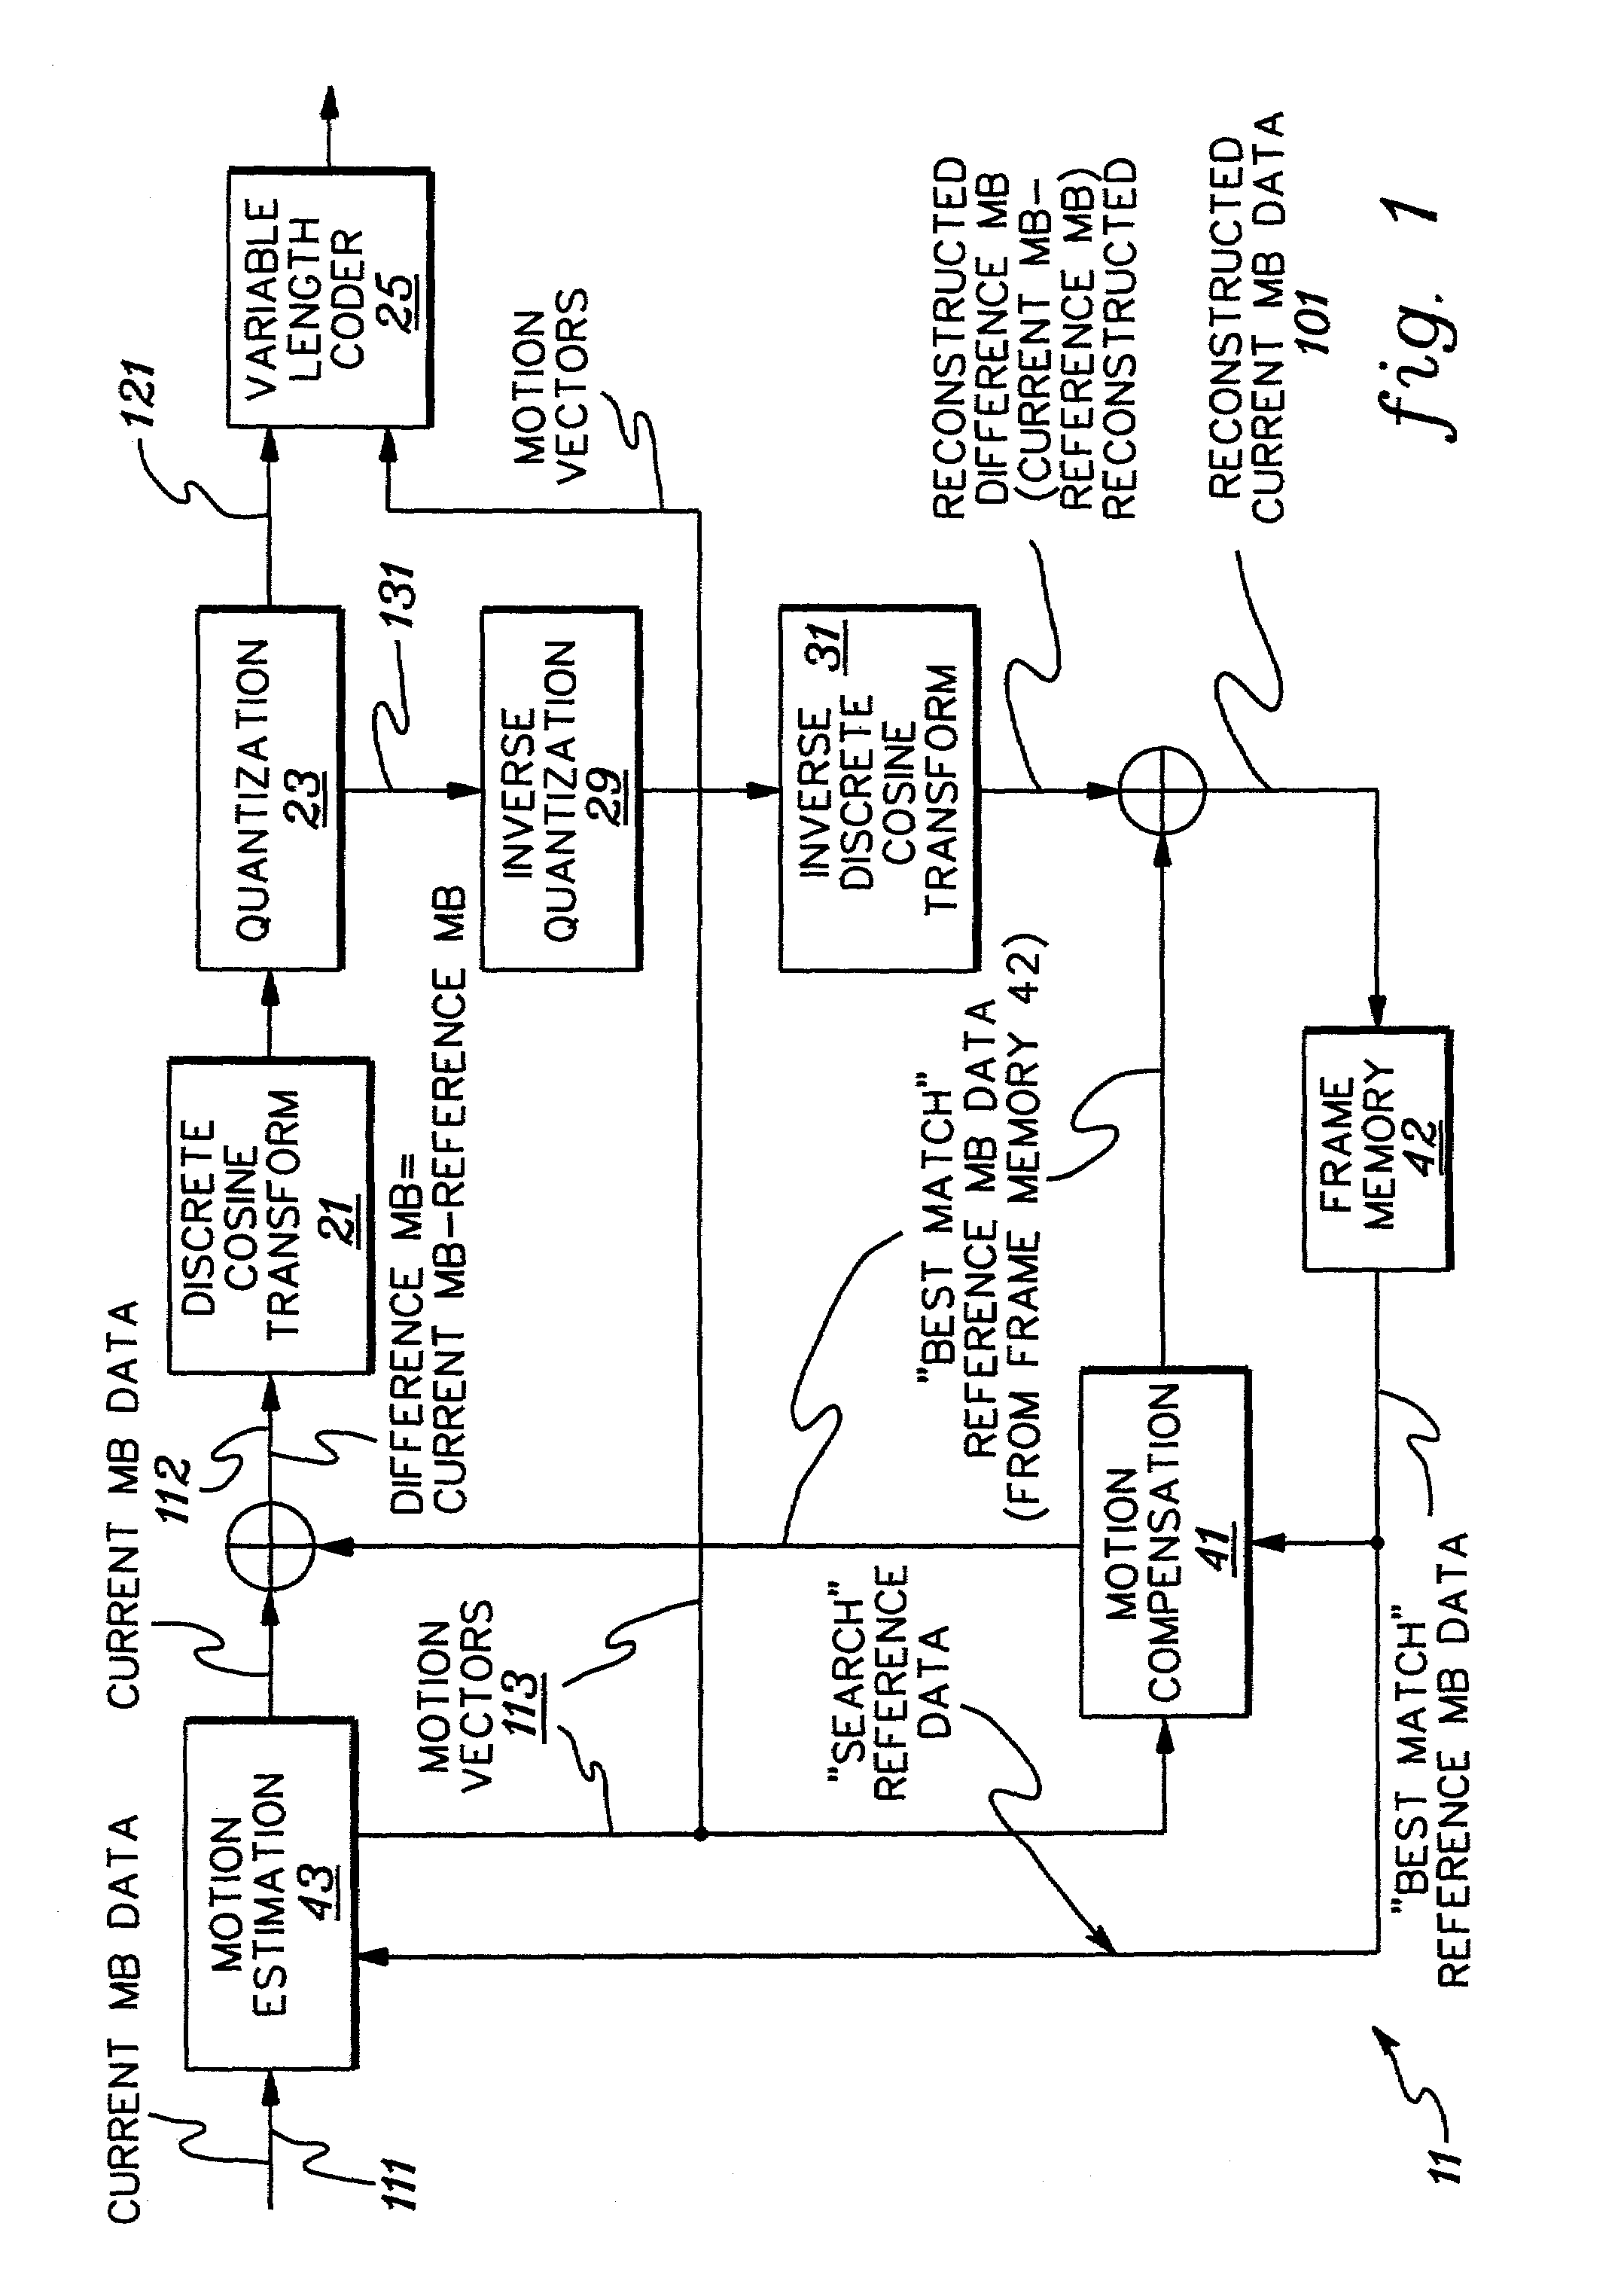 Programmable horizontal filter with noise reduction and image scaling for video encoding system